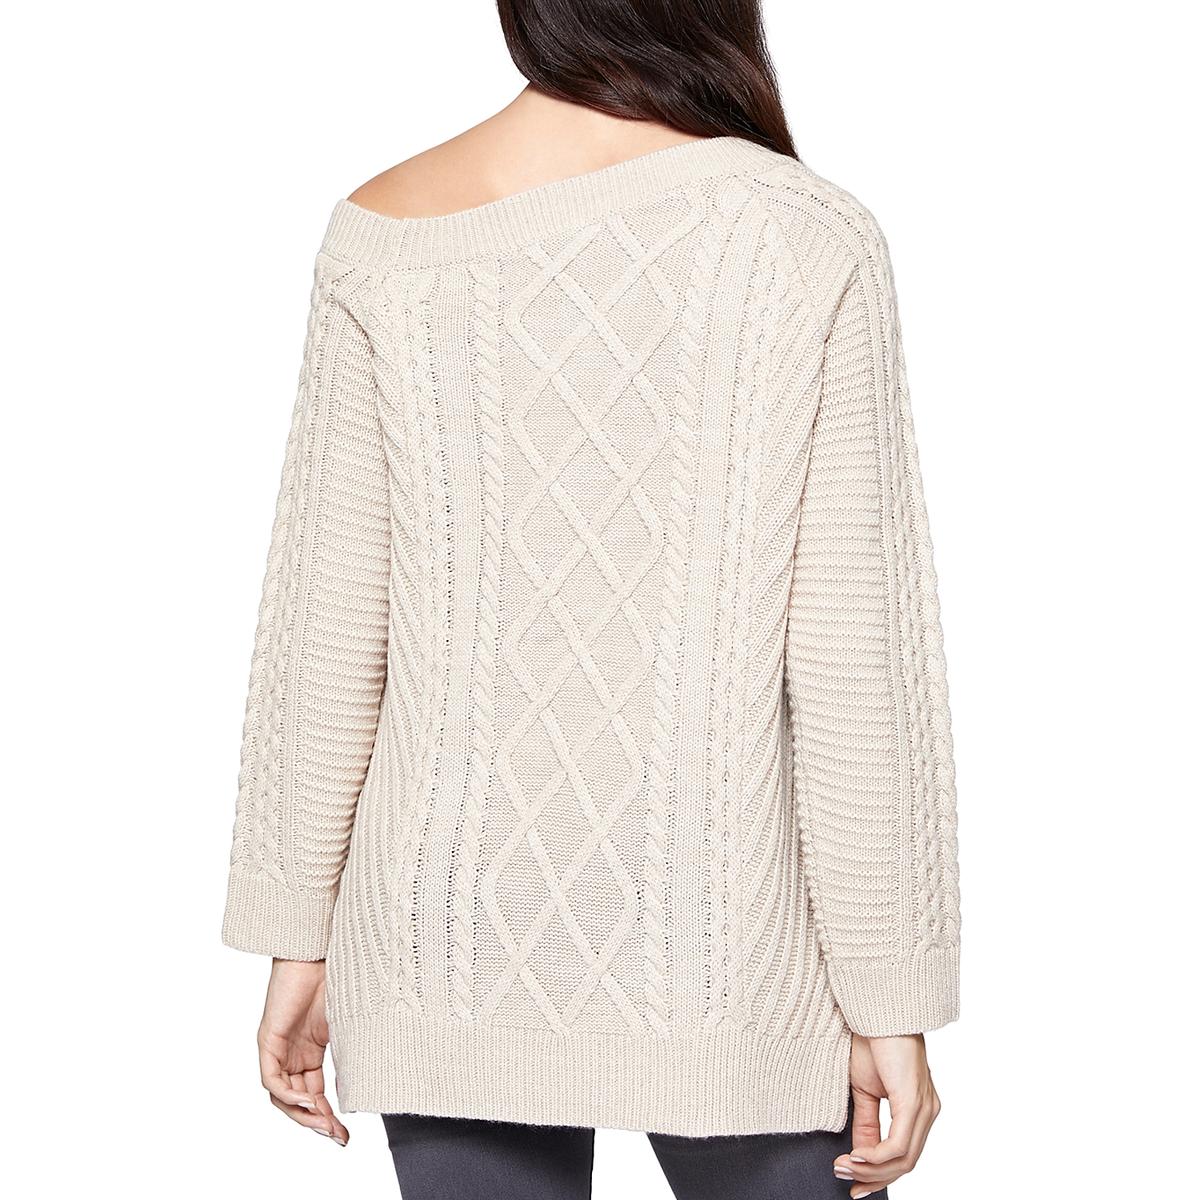 Sanctuary Womens Tinsley Beige Cable Knit Pullover Sweater Top XL BHFO